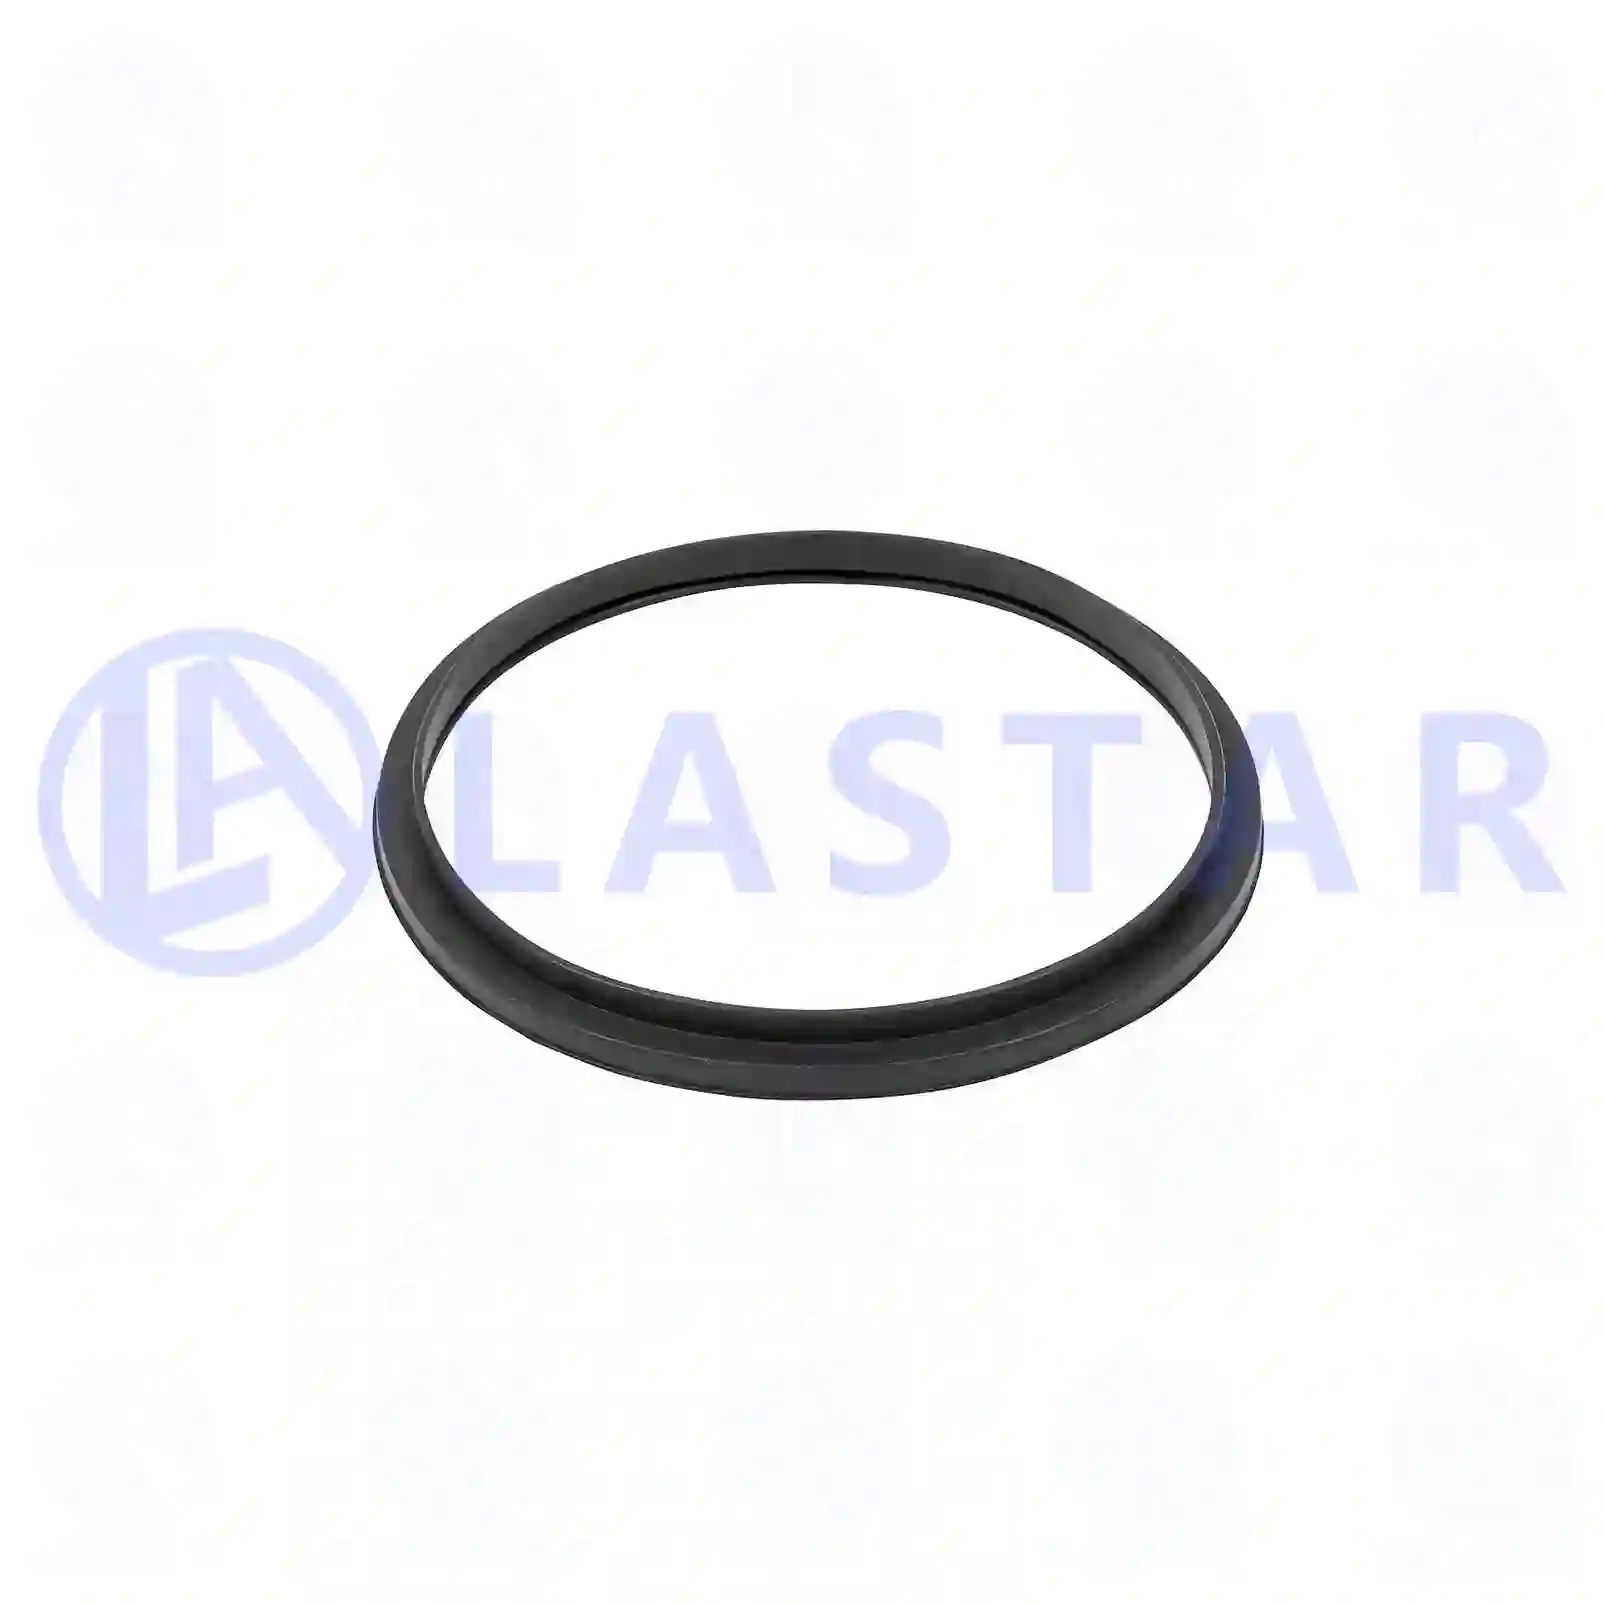 Thermostat gasket, 77703472, 030319103, 278335, 351197 ||  77703472 Lastar Spare Part | Truck Spare Parts, Auotomotive Spare Parts Thermostat gasket, 77703472, 030319103, 278335, 351197 ||  77703472 Lastar Spare Part | Truck Spare Parts, Auotomotive Spare Parts